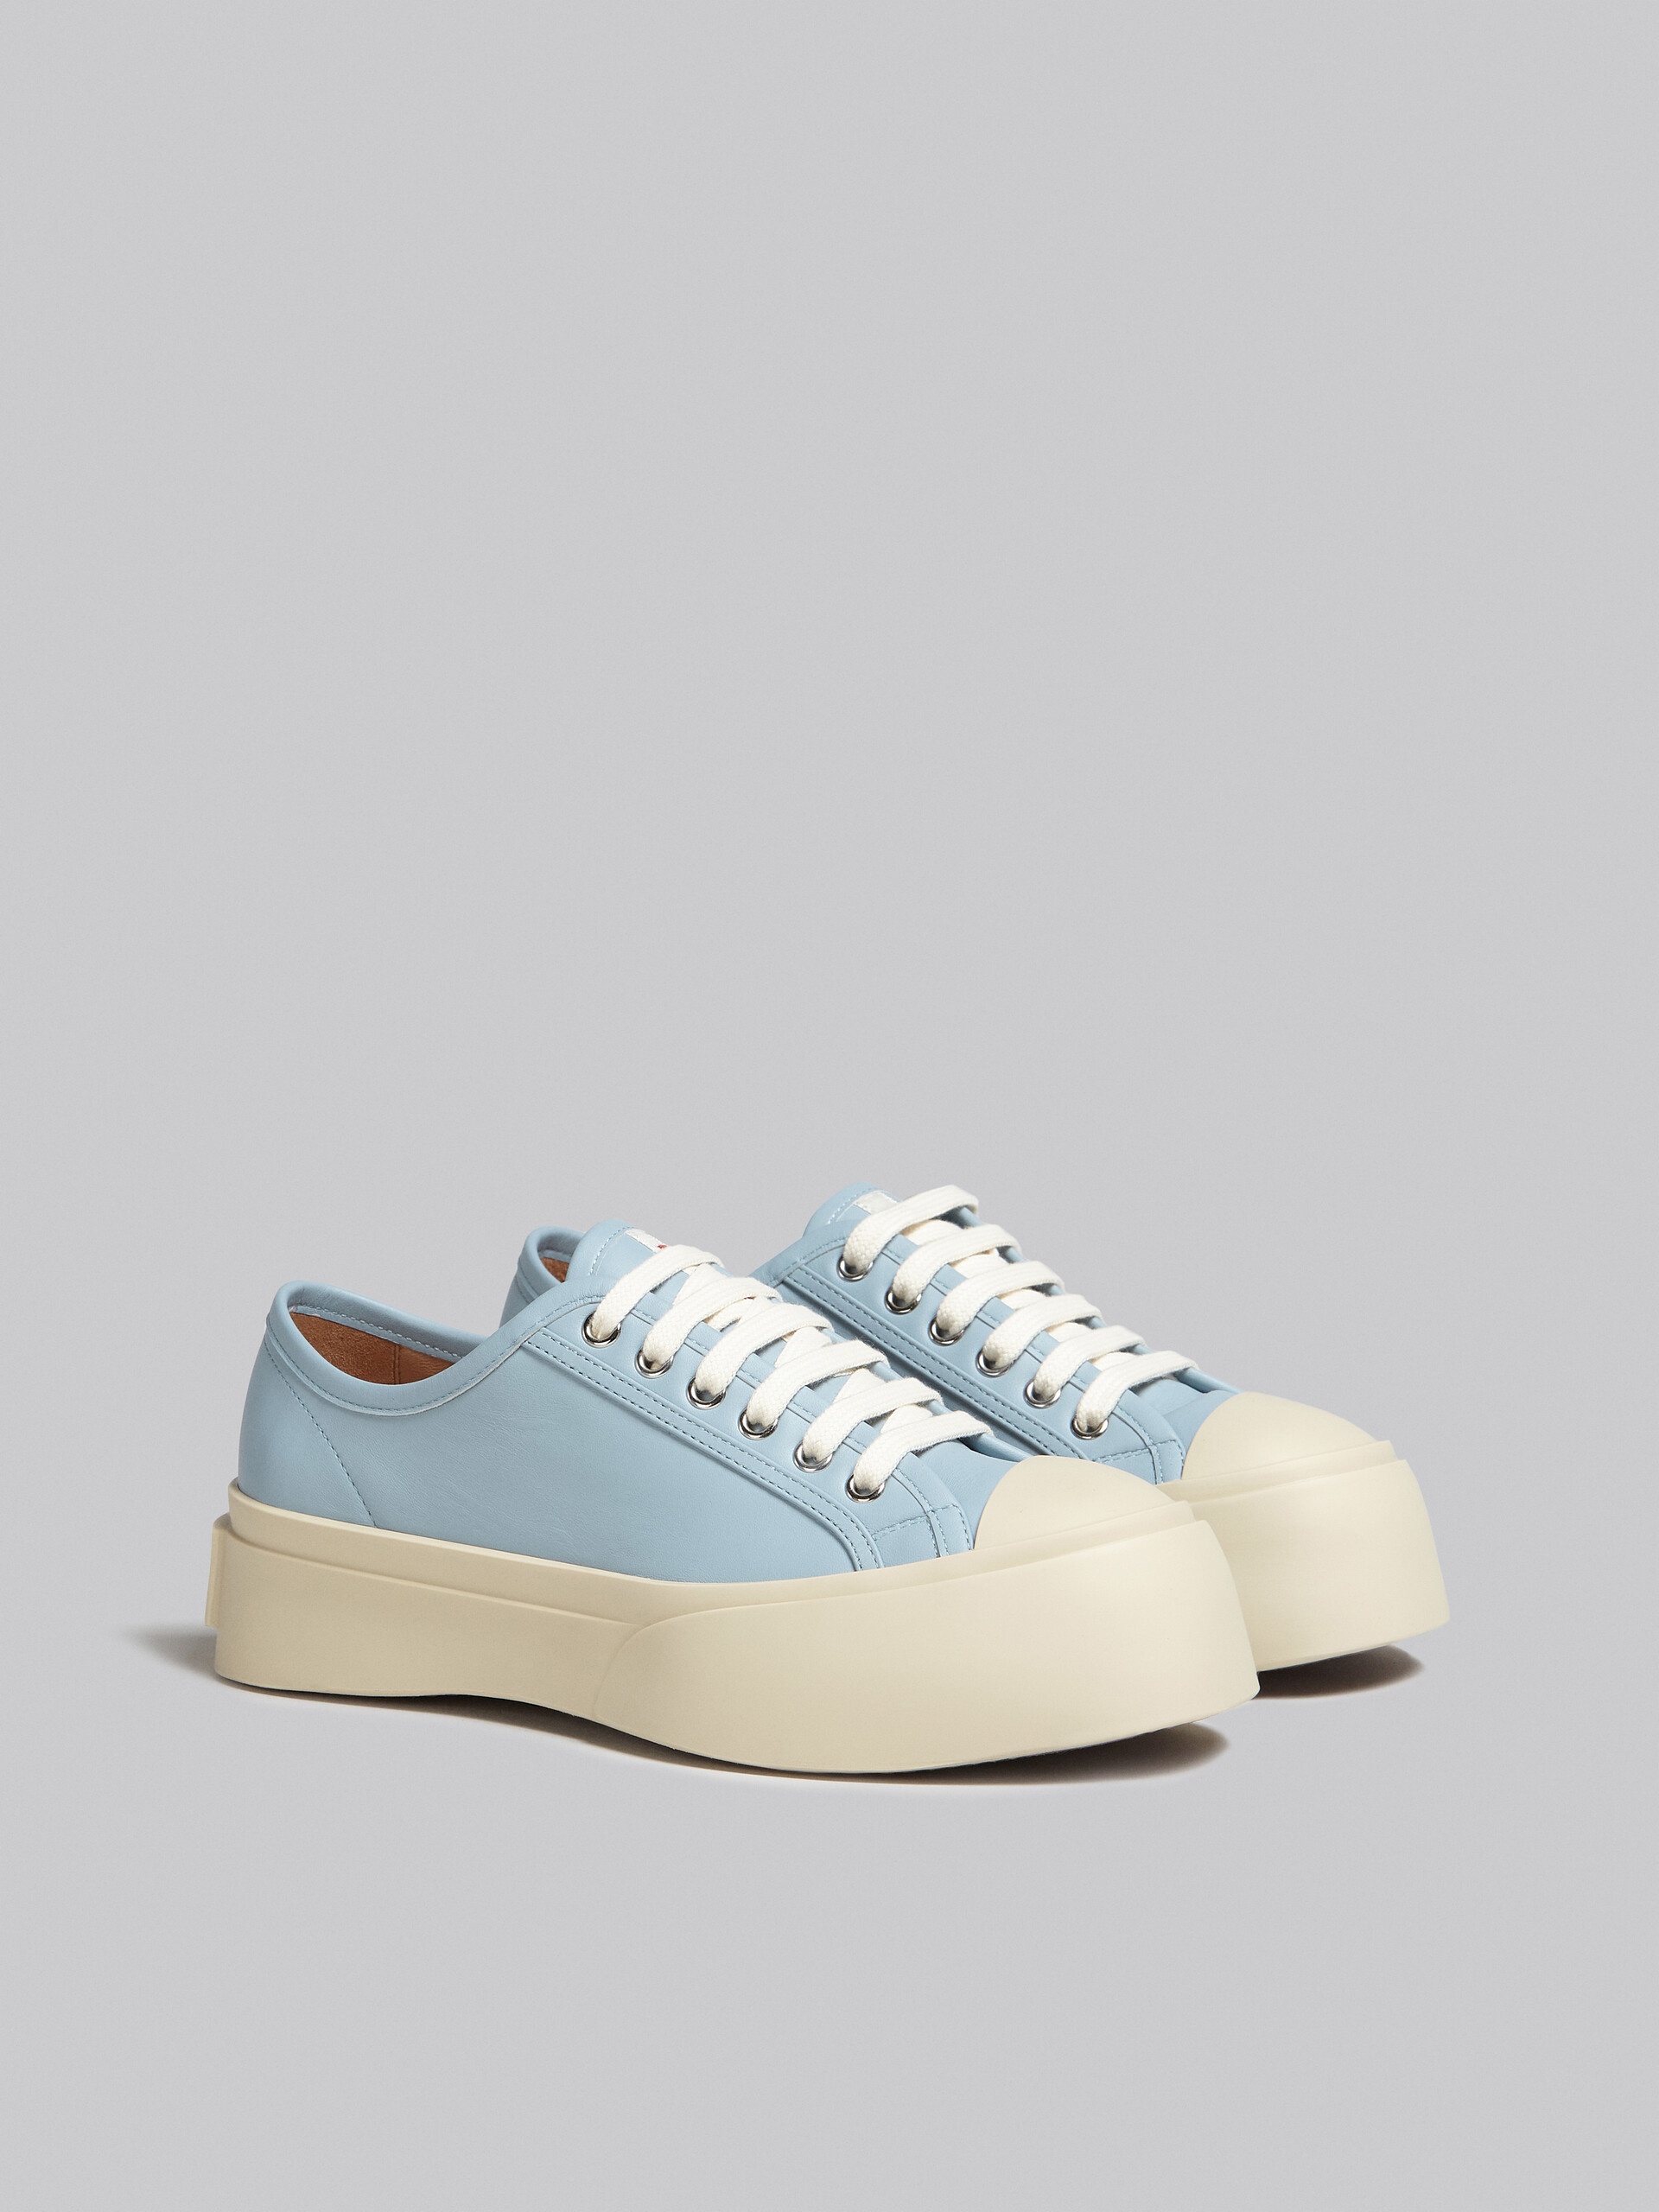 LIGHT BLUE NAPPA LEATHER PABLO LACE-UP SNEAKER - 2